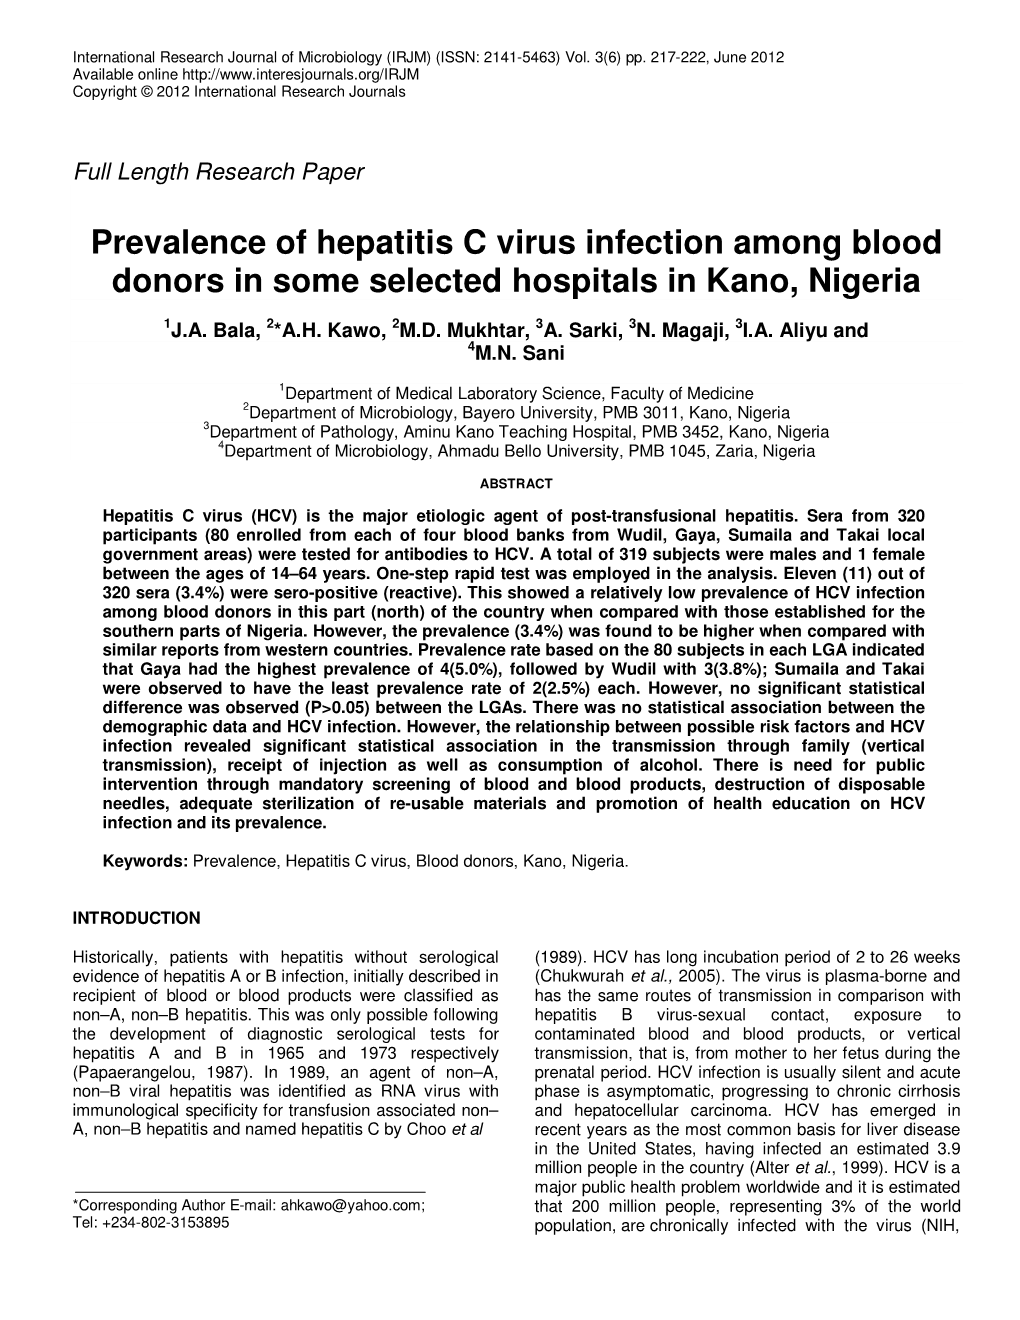 Prevalence of Hepatitis C Virus Infection Among Blood Donors in Some Selected Hospitals in Kano, Nigeria